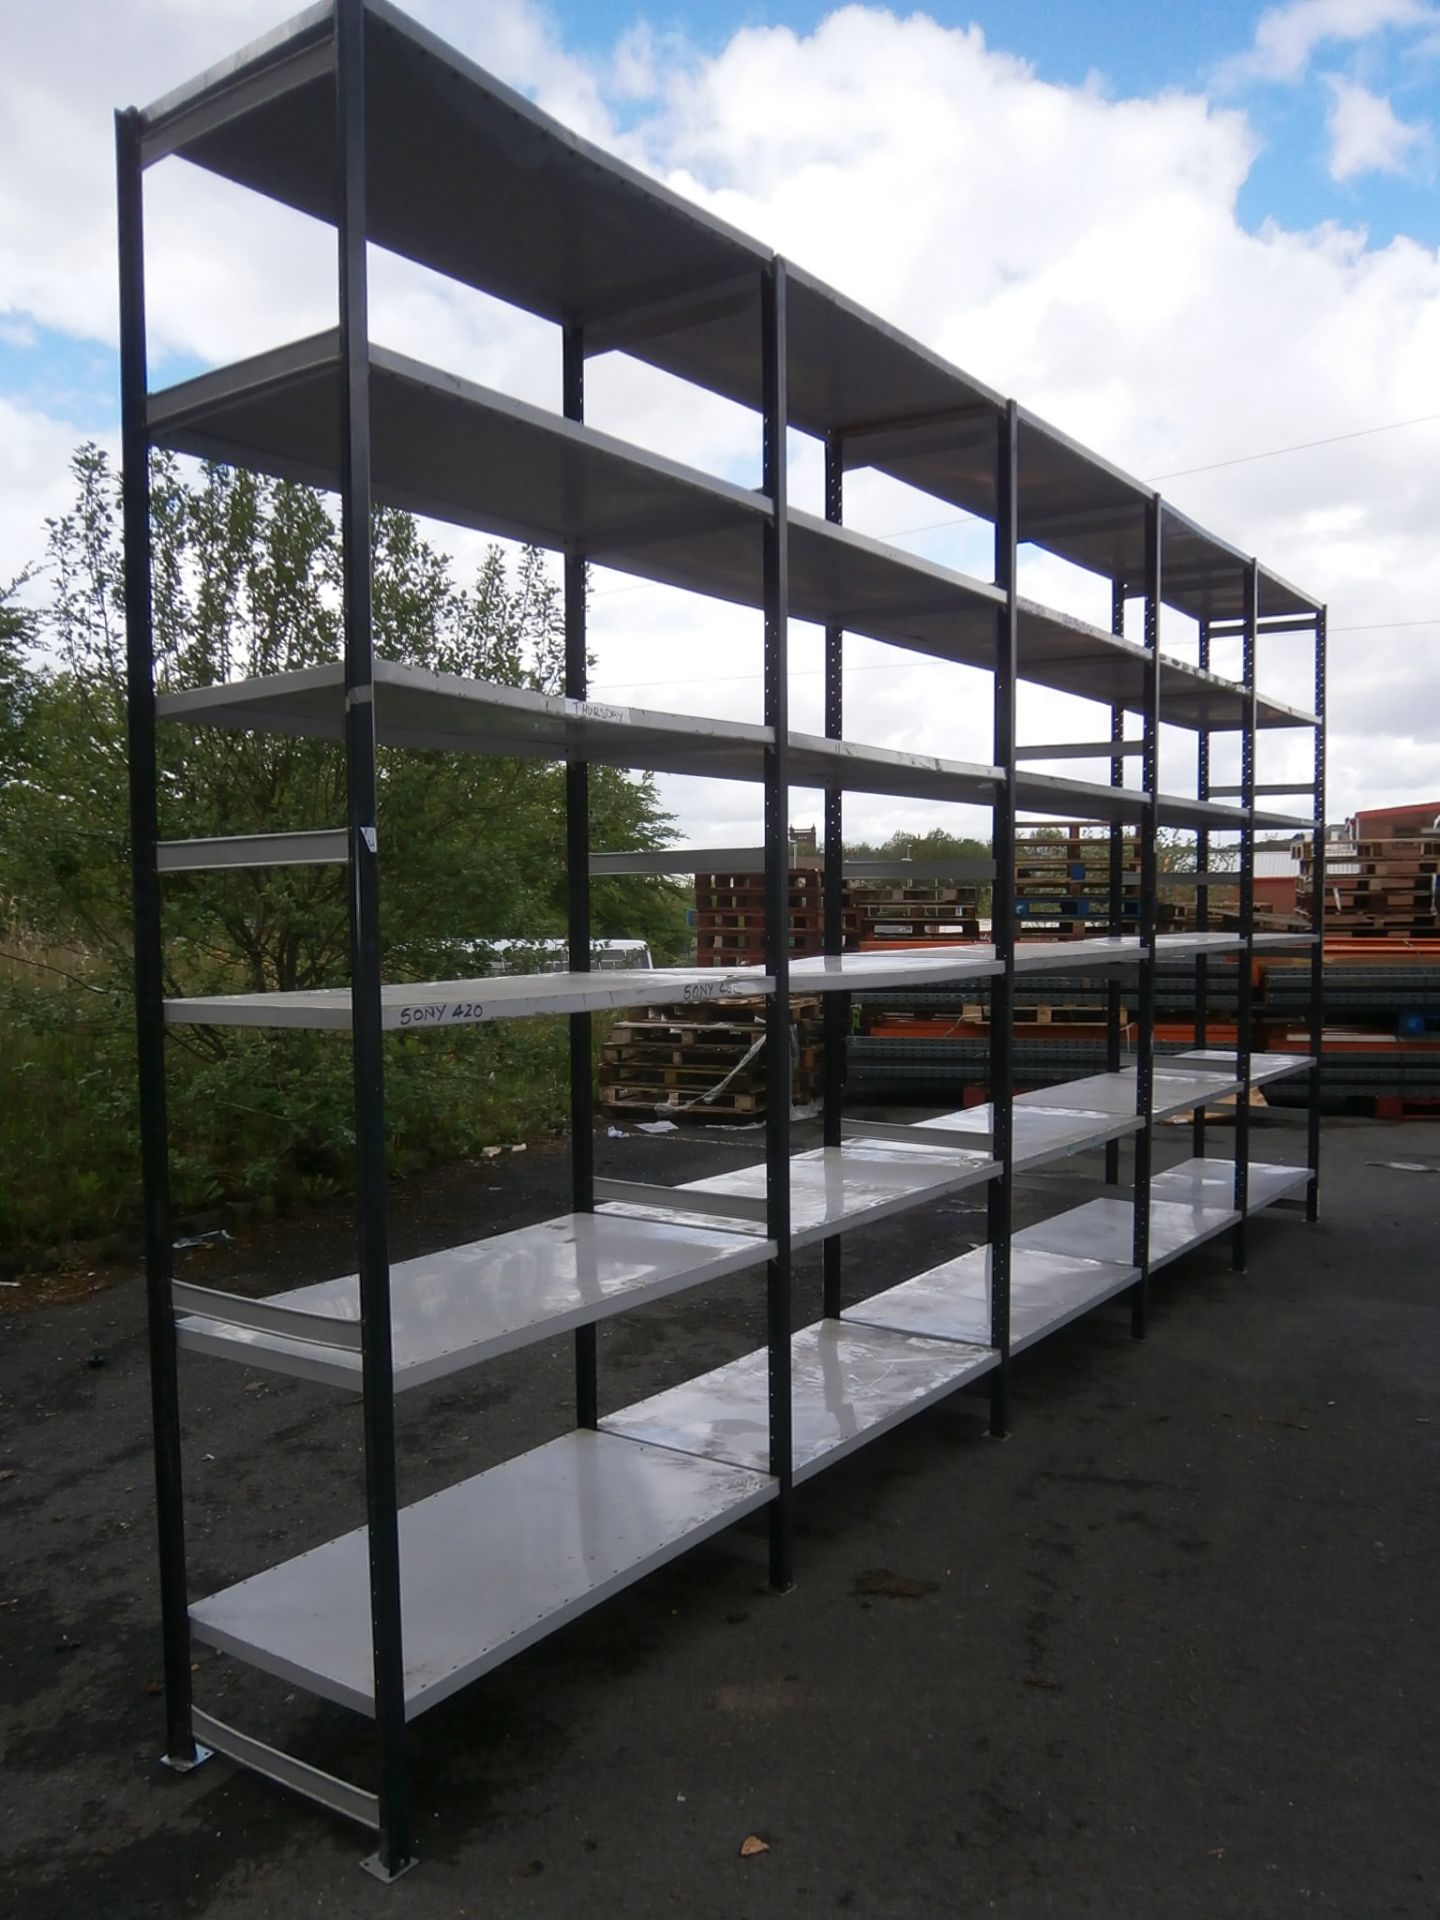 5 x Bays of Boltless Archive Shelving - Includes 6 x Uprights, 30 x Shelves and 120 Clips (Approx - Image 3 of 5